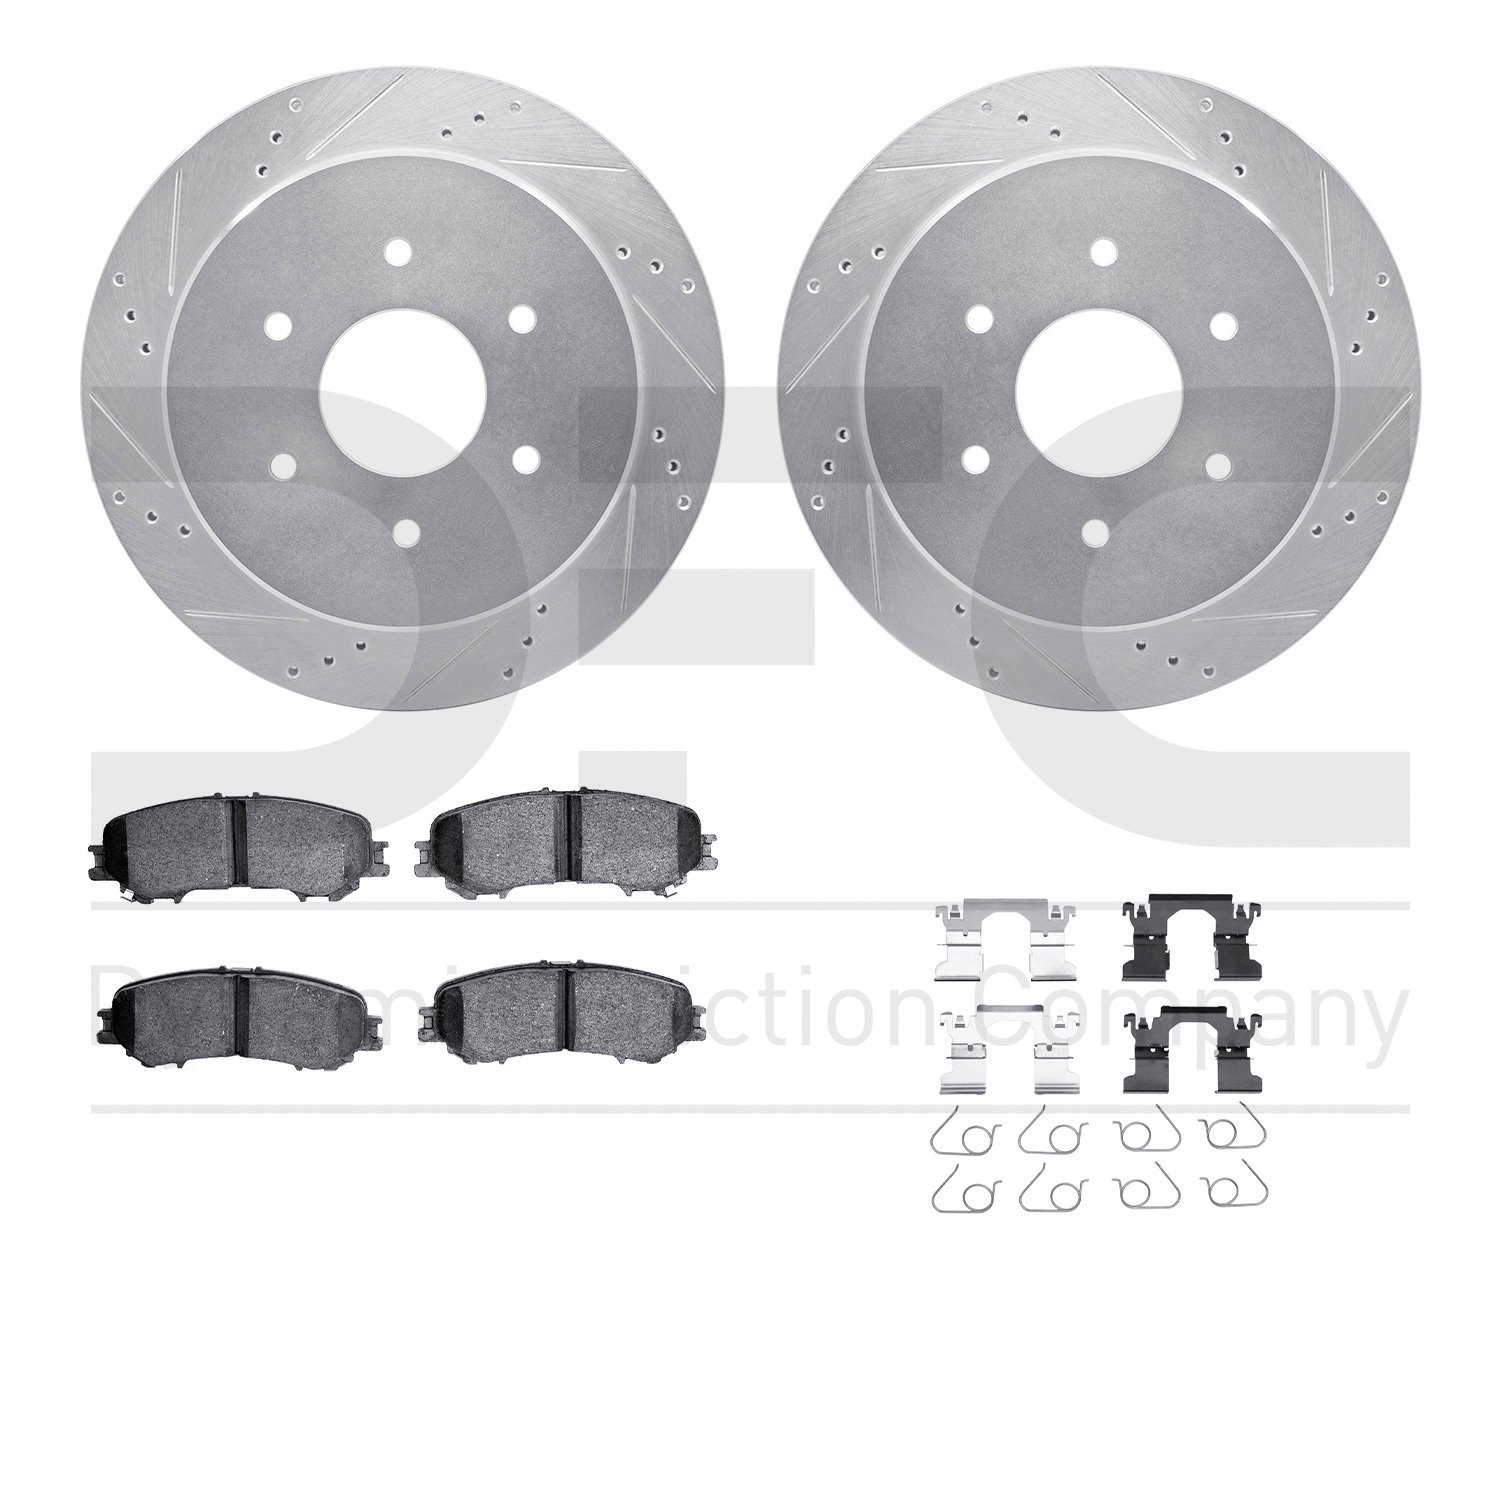 7512-67131 Drilled/Slotted Brake Rotors w/5000 Advanced Brake Pads Kit & Hardware [Silver], Fits Select Infiniti/Nissan, Positio